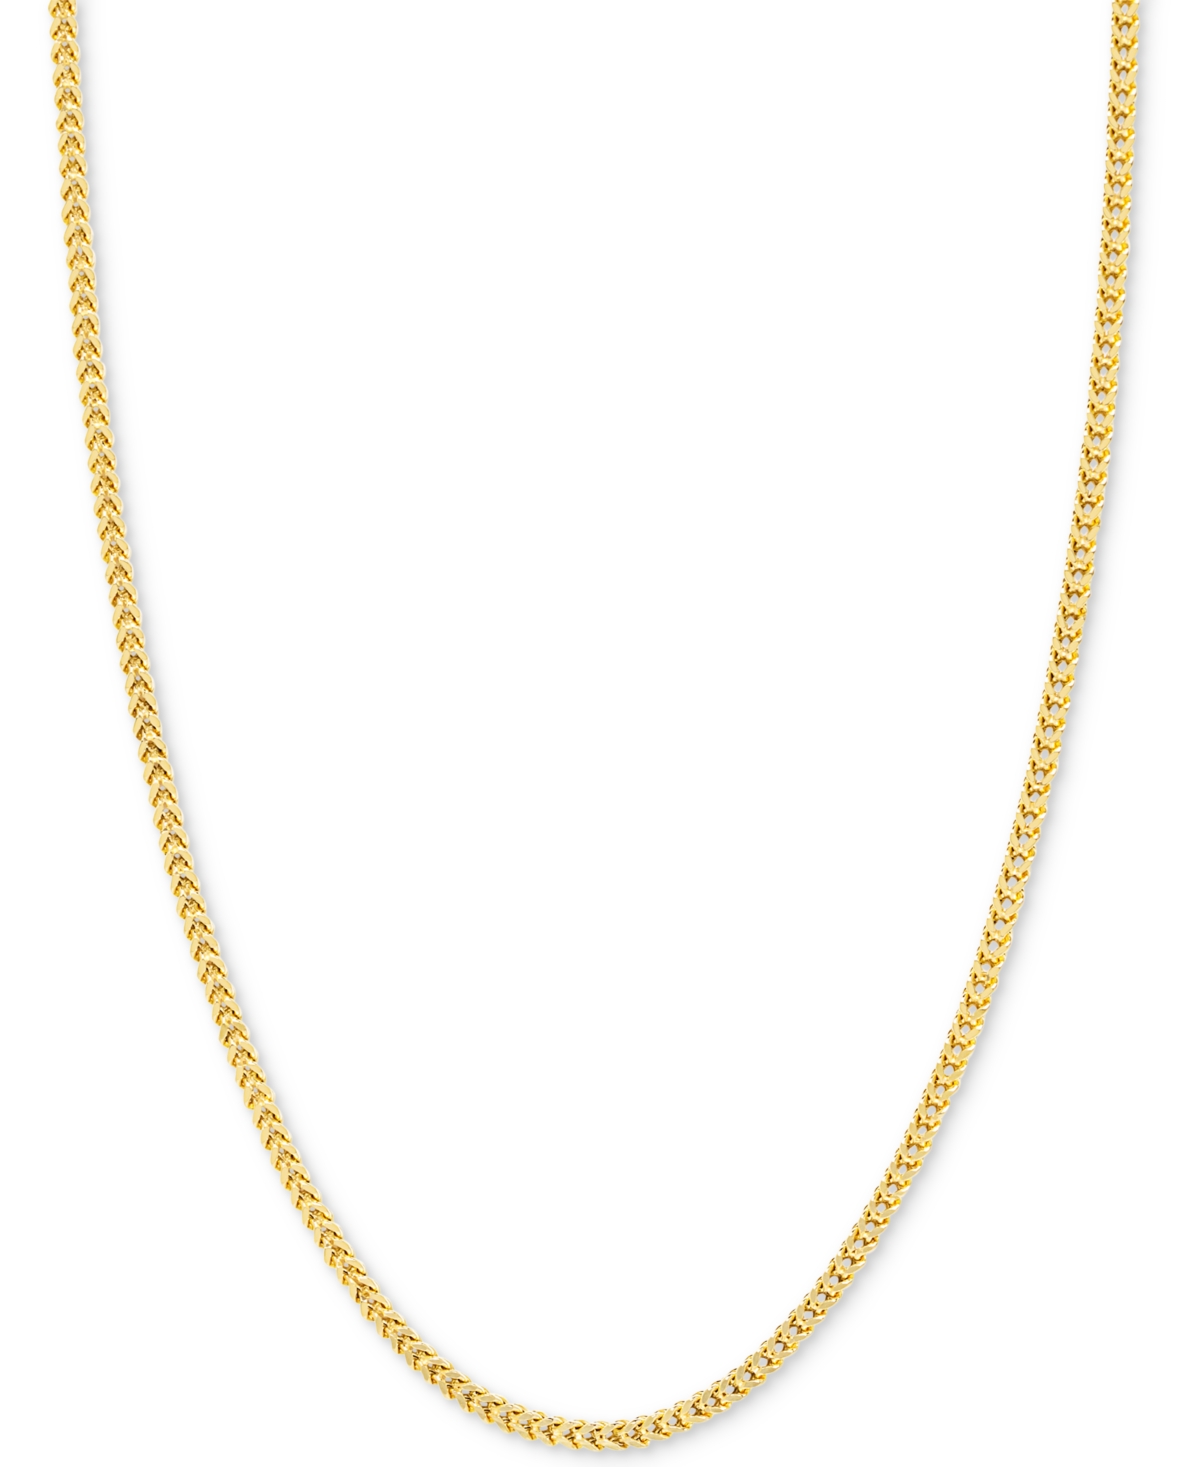 Italian Gold 18" Franco Chain Necklace (1-7/8mm) in 14k Gold